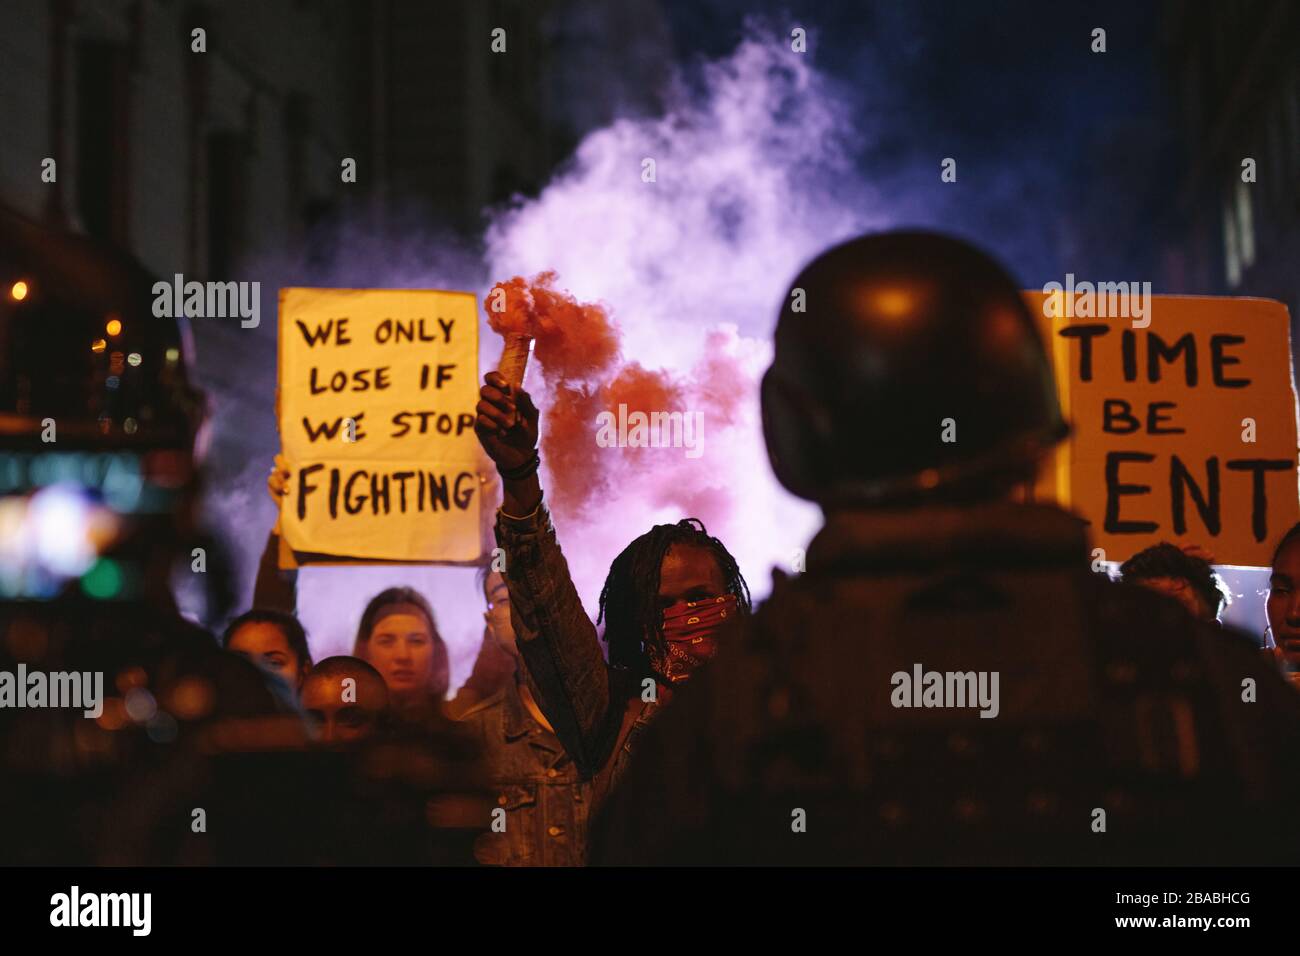 Group of activists protesting with smoke grenades at night. Group of men and women on anti-government protest. Stock Photo